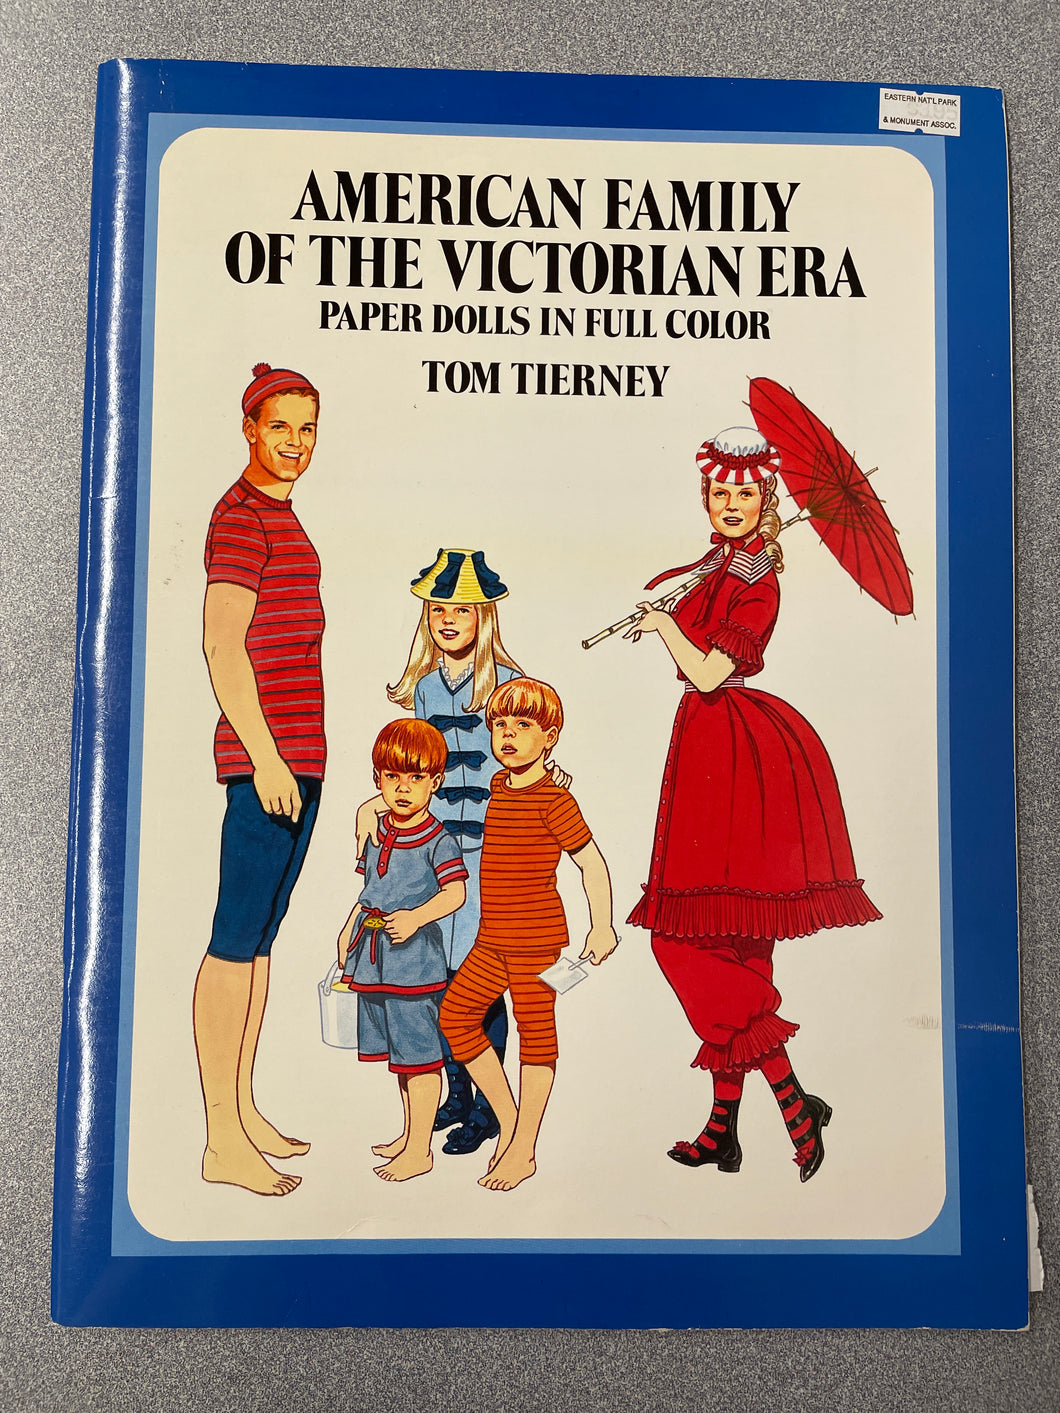 American Family of the Victorian Era: Paper Dolls in Full Color, Tierney, Tom [1986] CN 2/24